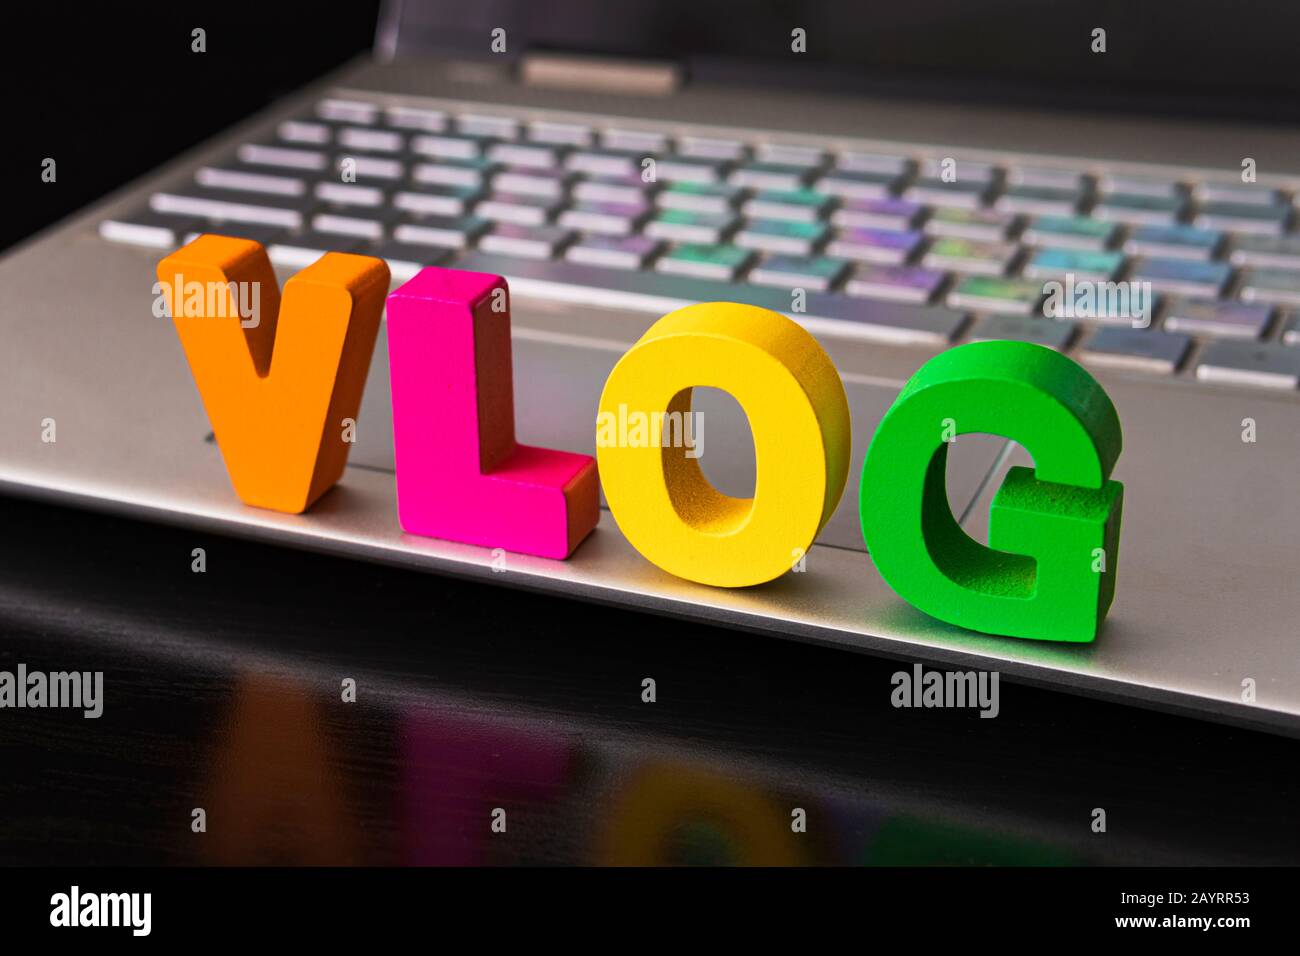 Vlog or video blog concept with vlog word from funny letters on